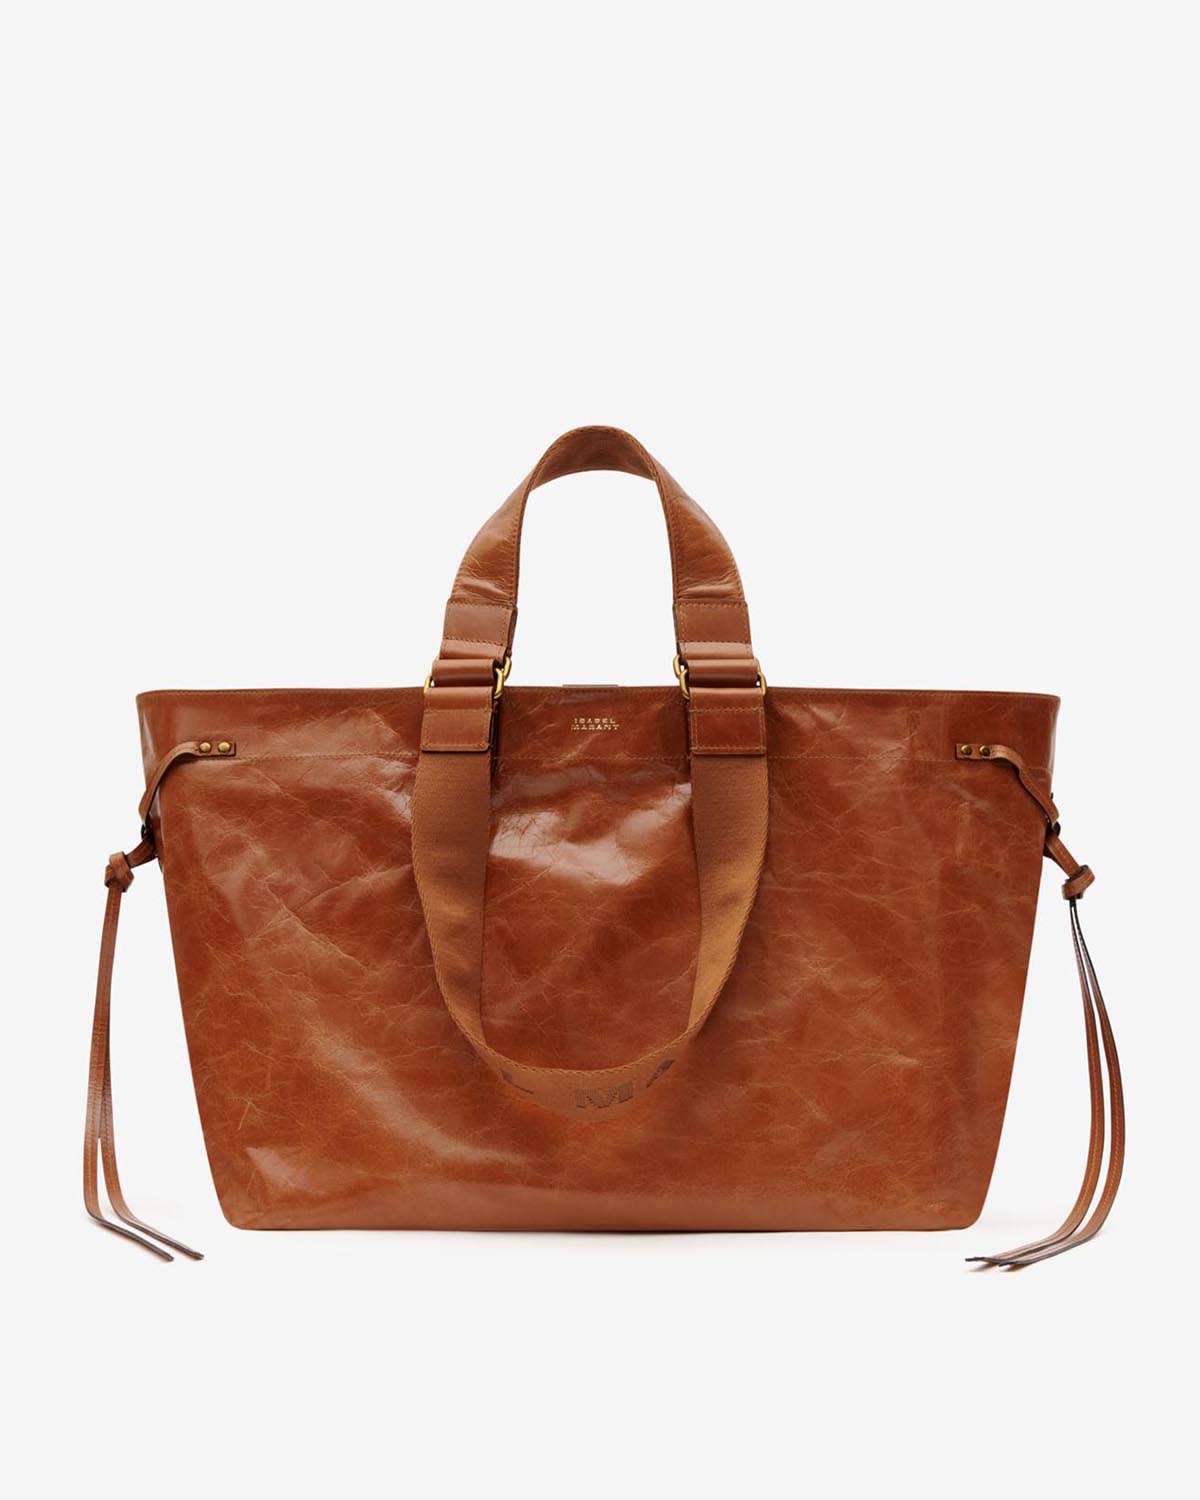 Bags Woman and Man | ISABEL MARANT Official Online Store